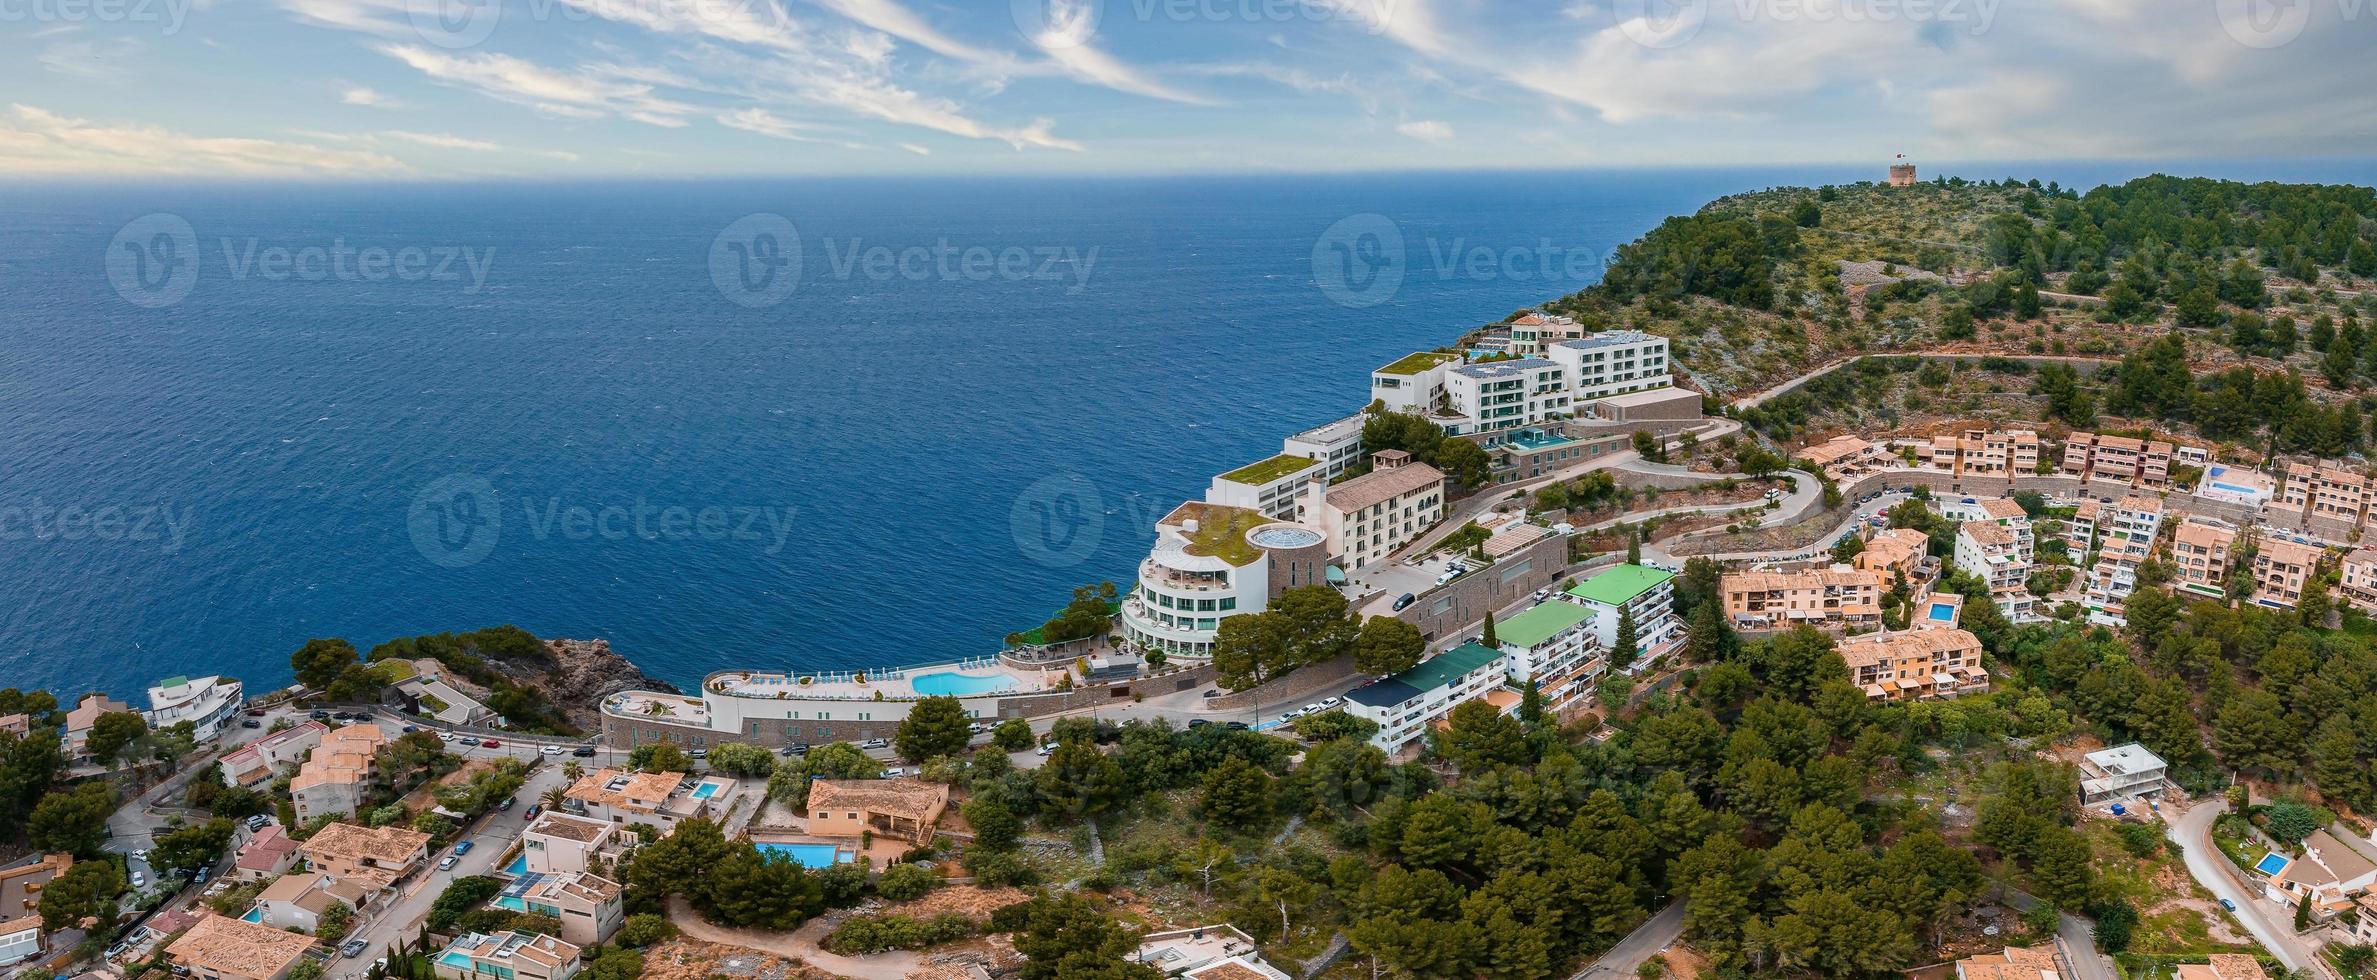 Aerial view of the luxury cliff house hotel on top of the cliff on the island of Mallorca. photo